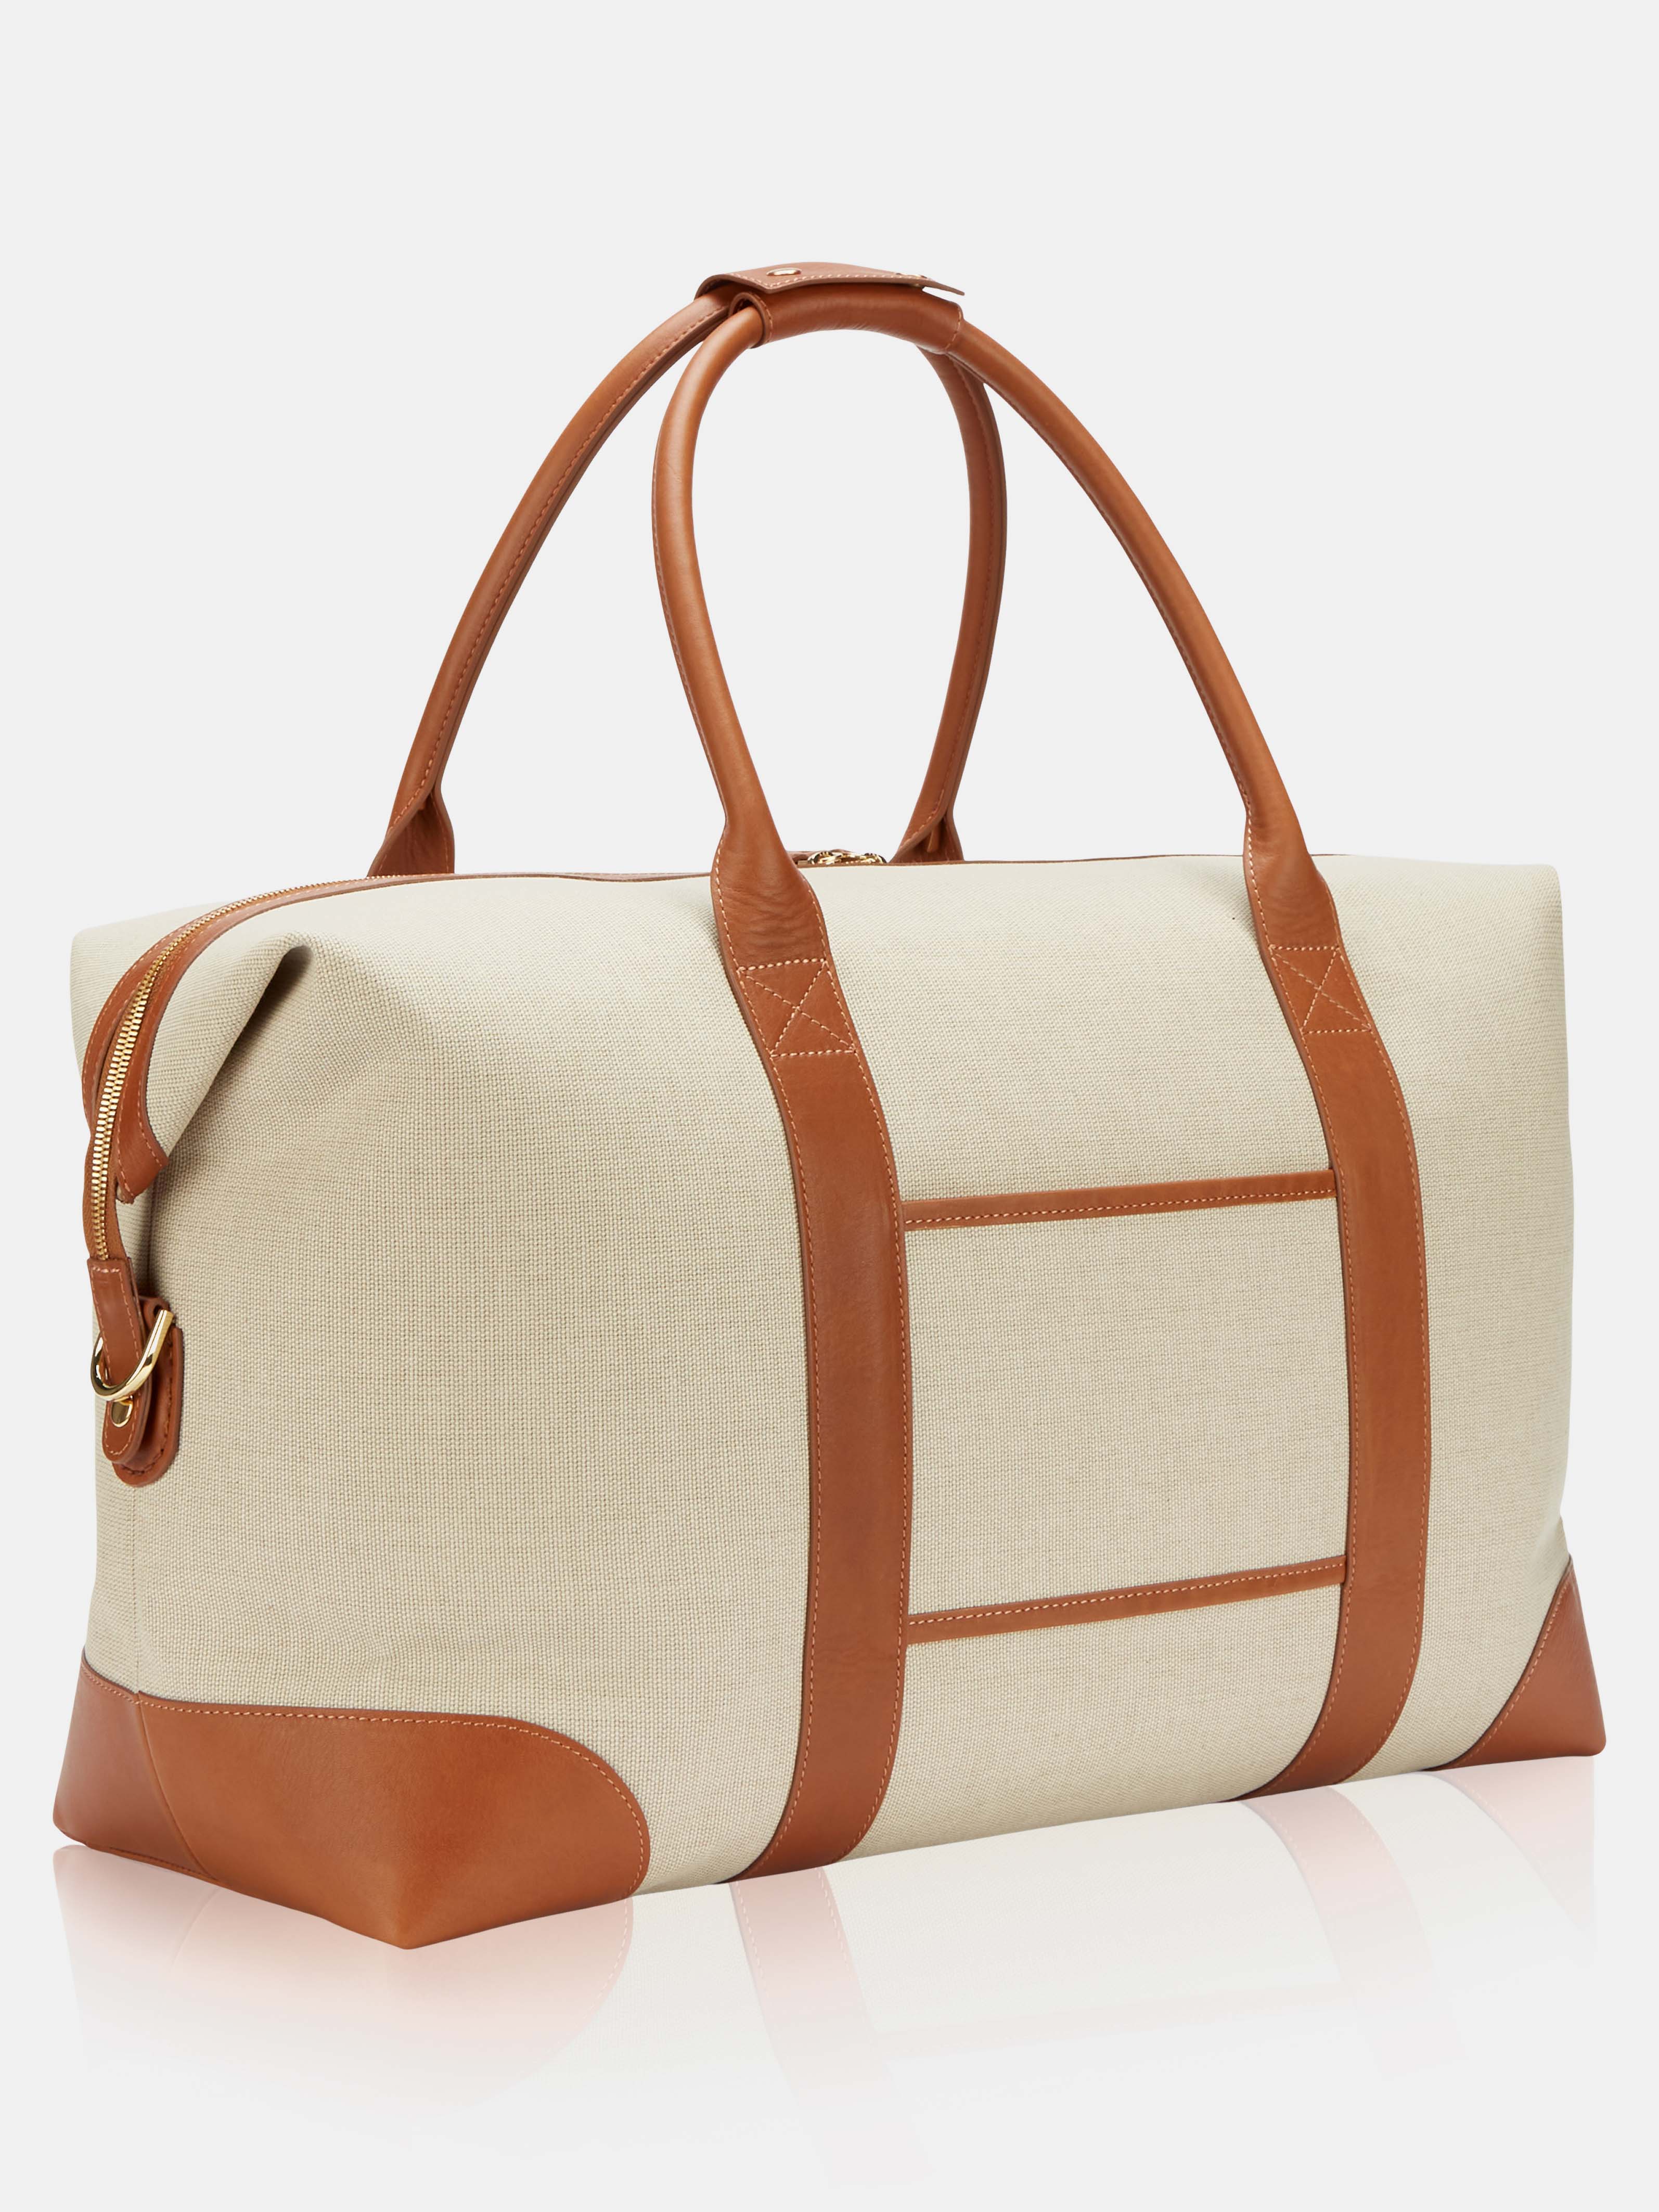 Letter 'P' The Weekend Bag, Cream & Claret